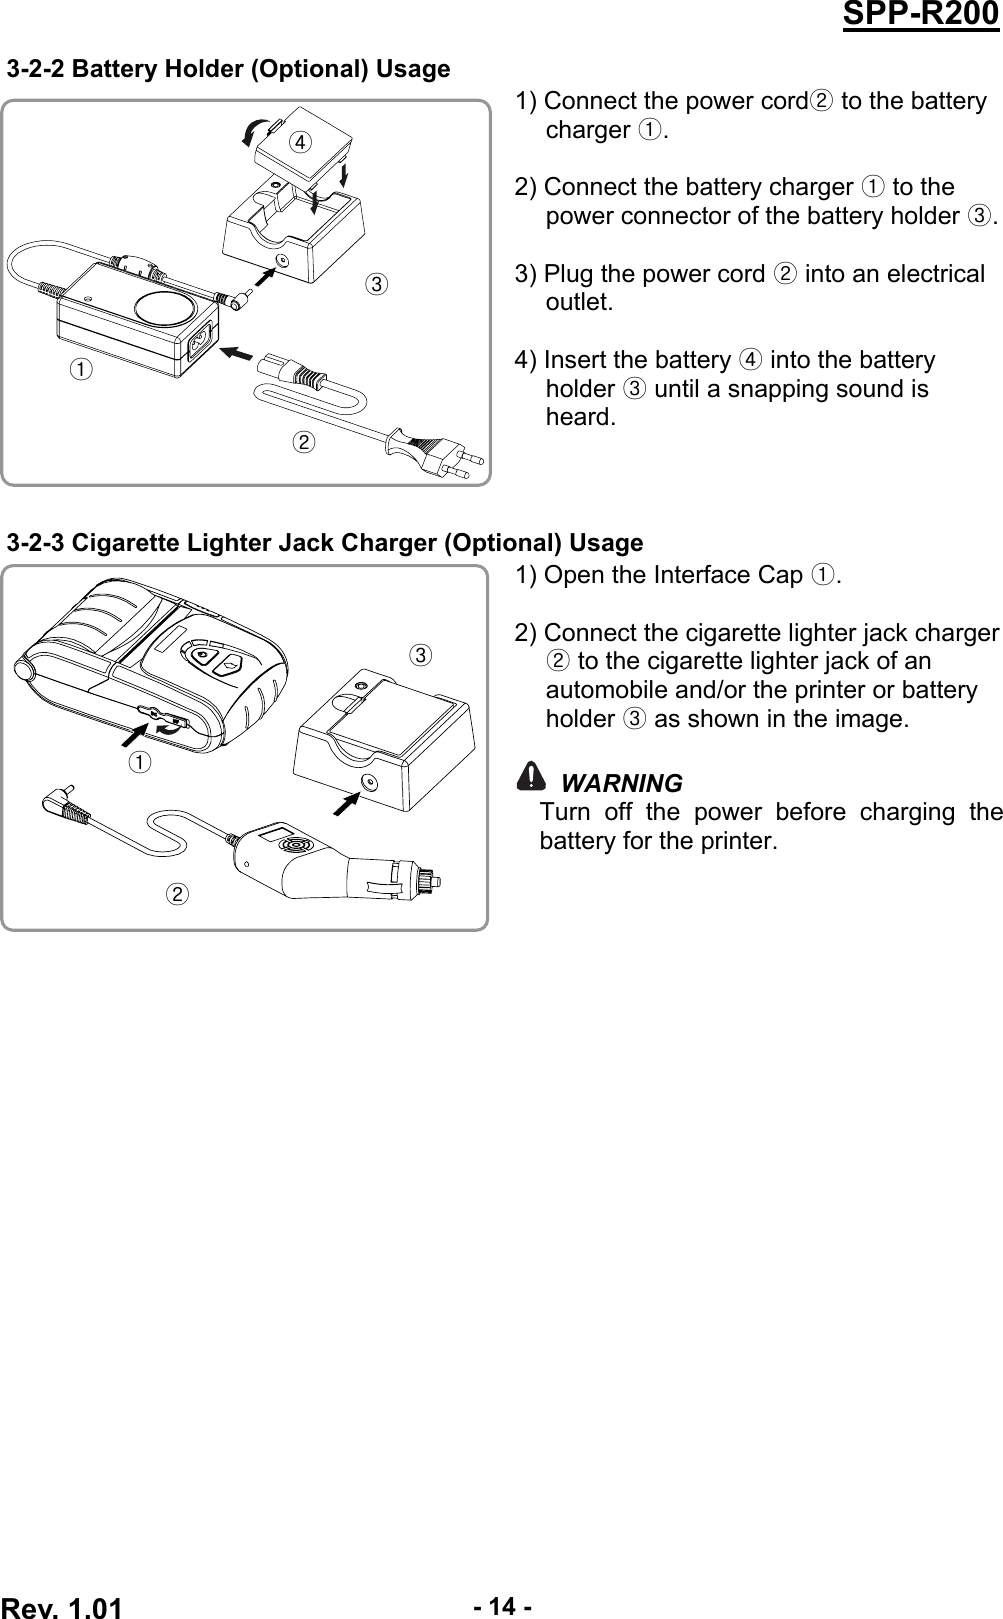  Rev. 1.01  - 14 -SPP-R2003-2-2 Battery Holder (Optional) Usage 1) Connect the power cord  to the battery ②charger .①  2) Connect the battery charger   to the ①power connector of the battery holder  .③ 3) Plug the power cord   into an electrical ②outlet.  4) Insert the battery ④ into the battery holder   until a snapping sound is ③heard.  3-2-3 Cigarette Lighter Jack Charger (Optional) Usage 1) Open the Interface Cap ①.  2) Connect the cigarette lighter jack charger ② to the cigarette lighter jack of an automobile and/or the printer or battery holder ③ as shown in the image.   WARNING Turn off the power before charging the battery for the printer.  ① ② ③ ④ ① ② ③ 